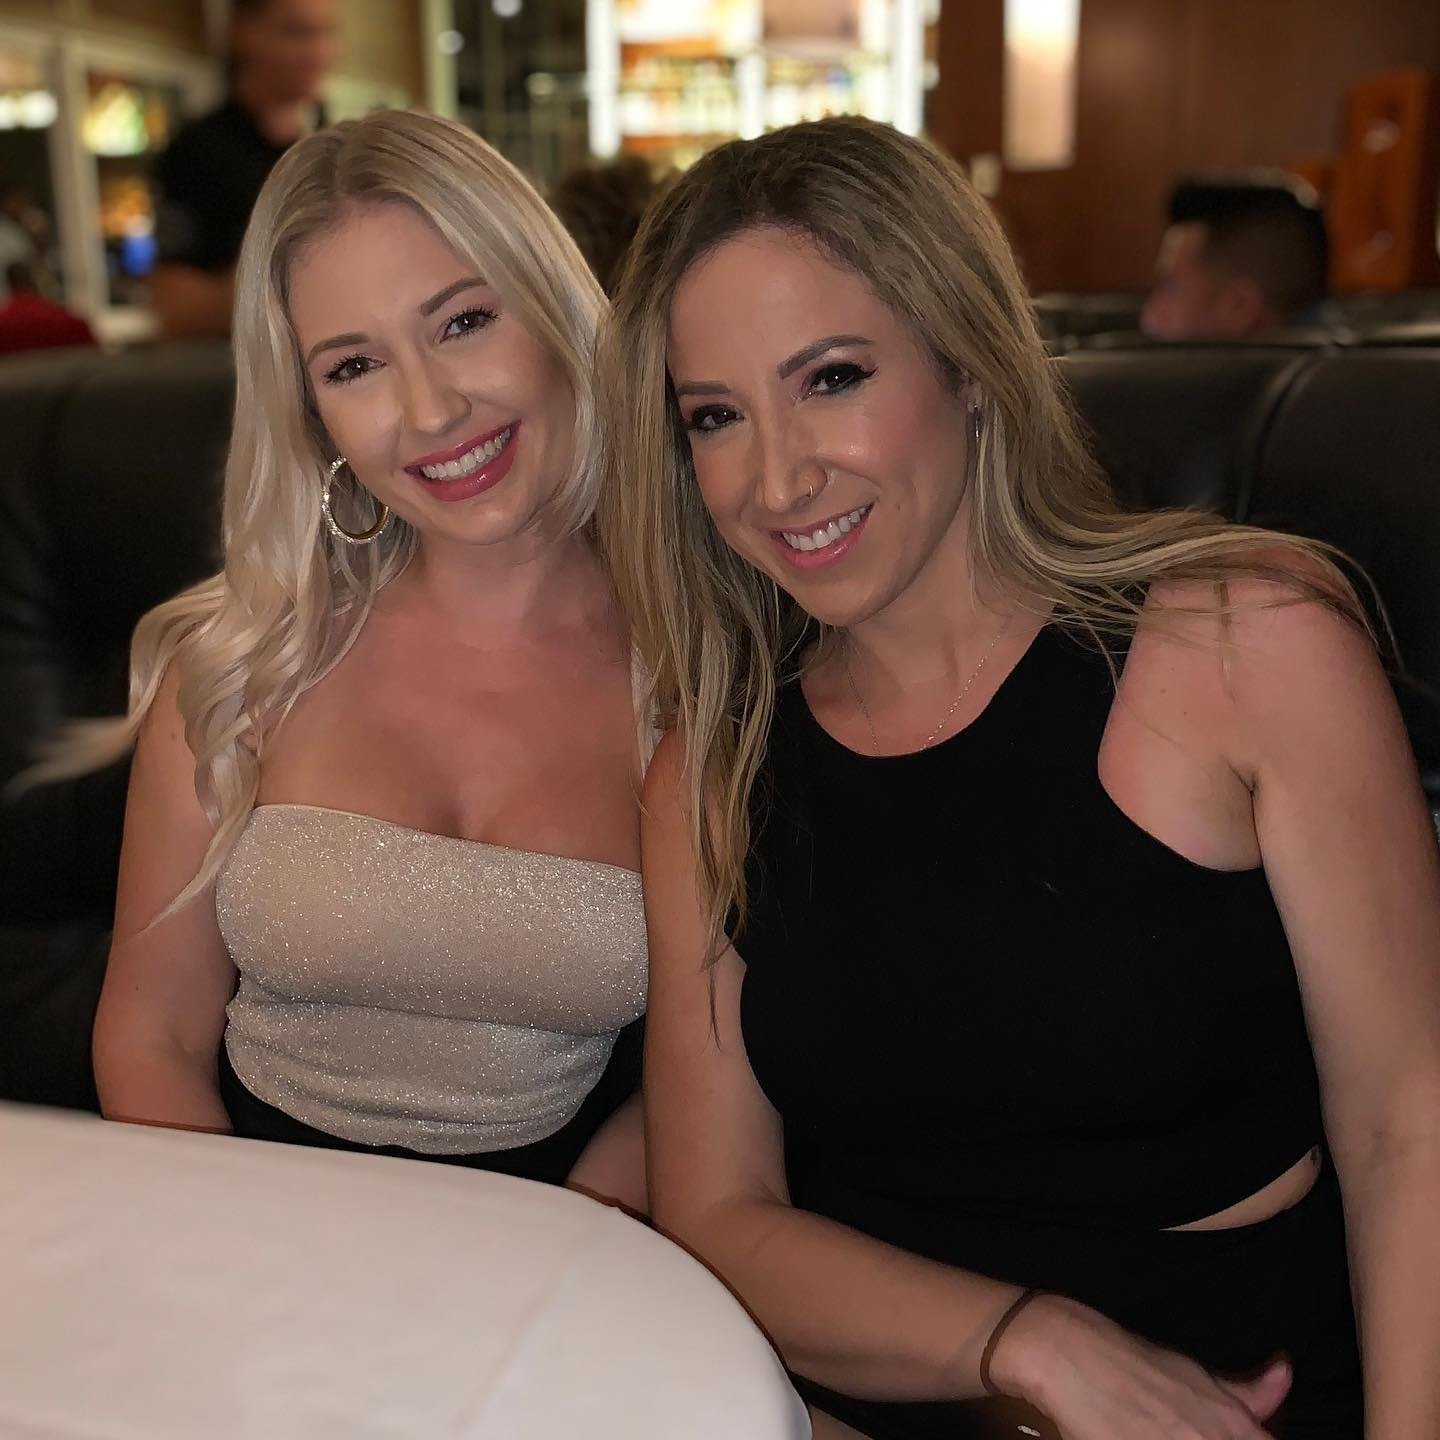 Lesbian Sisters Onlyfans - Porn Videos and Photos image